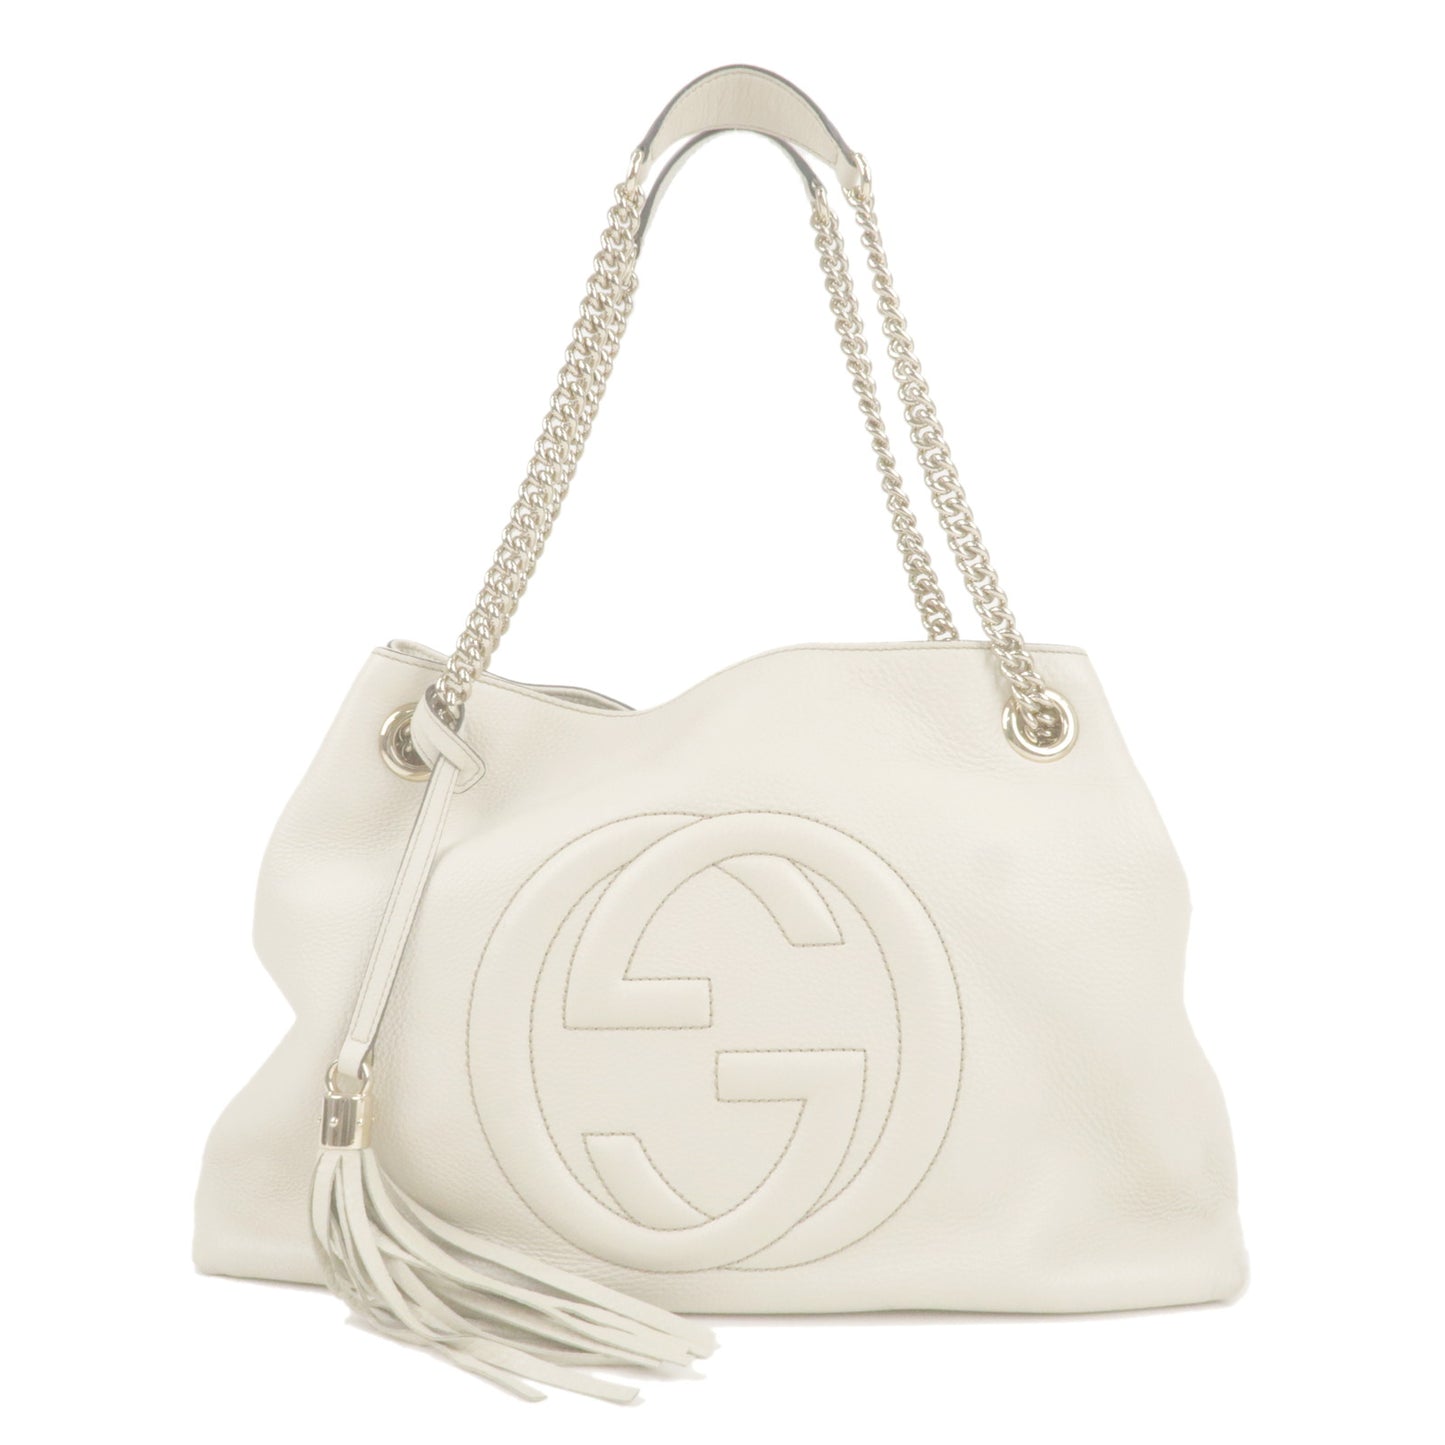 Authentic-GUCCI-SOHO-Leather-Chain-Shoulder-Bag-Tote-Bag-Ivory-308982-Used-F/S